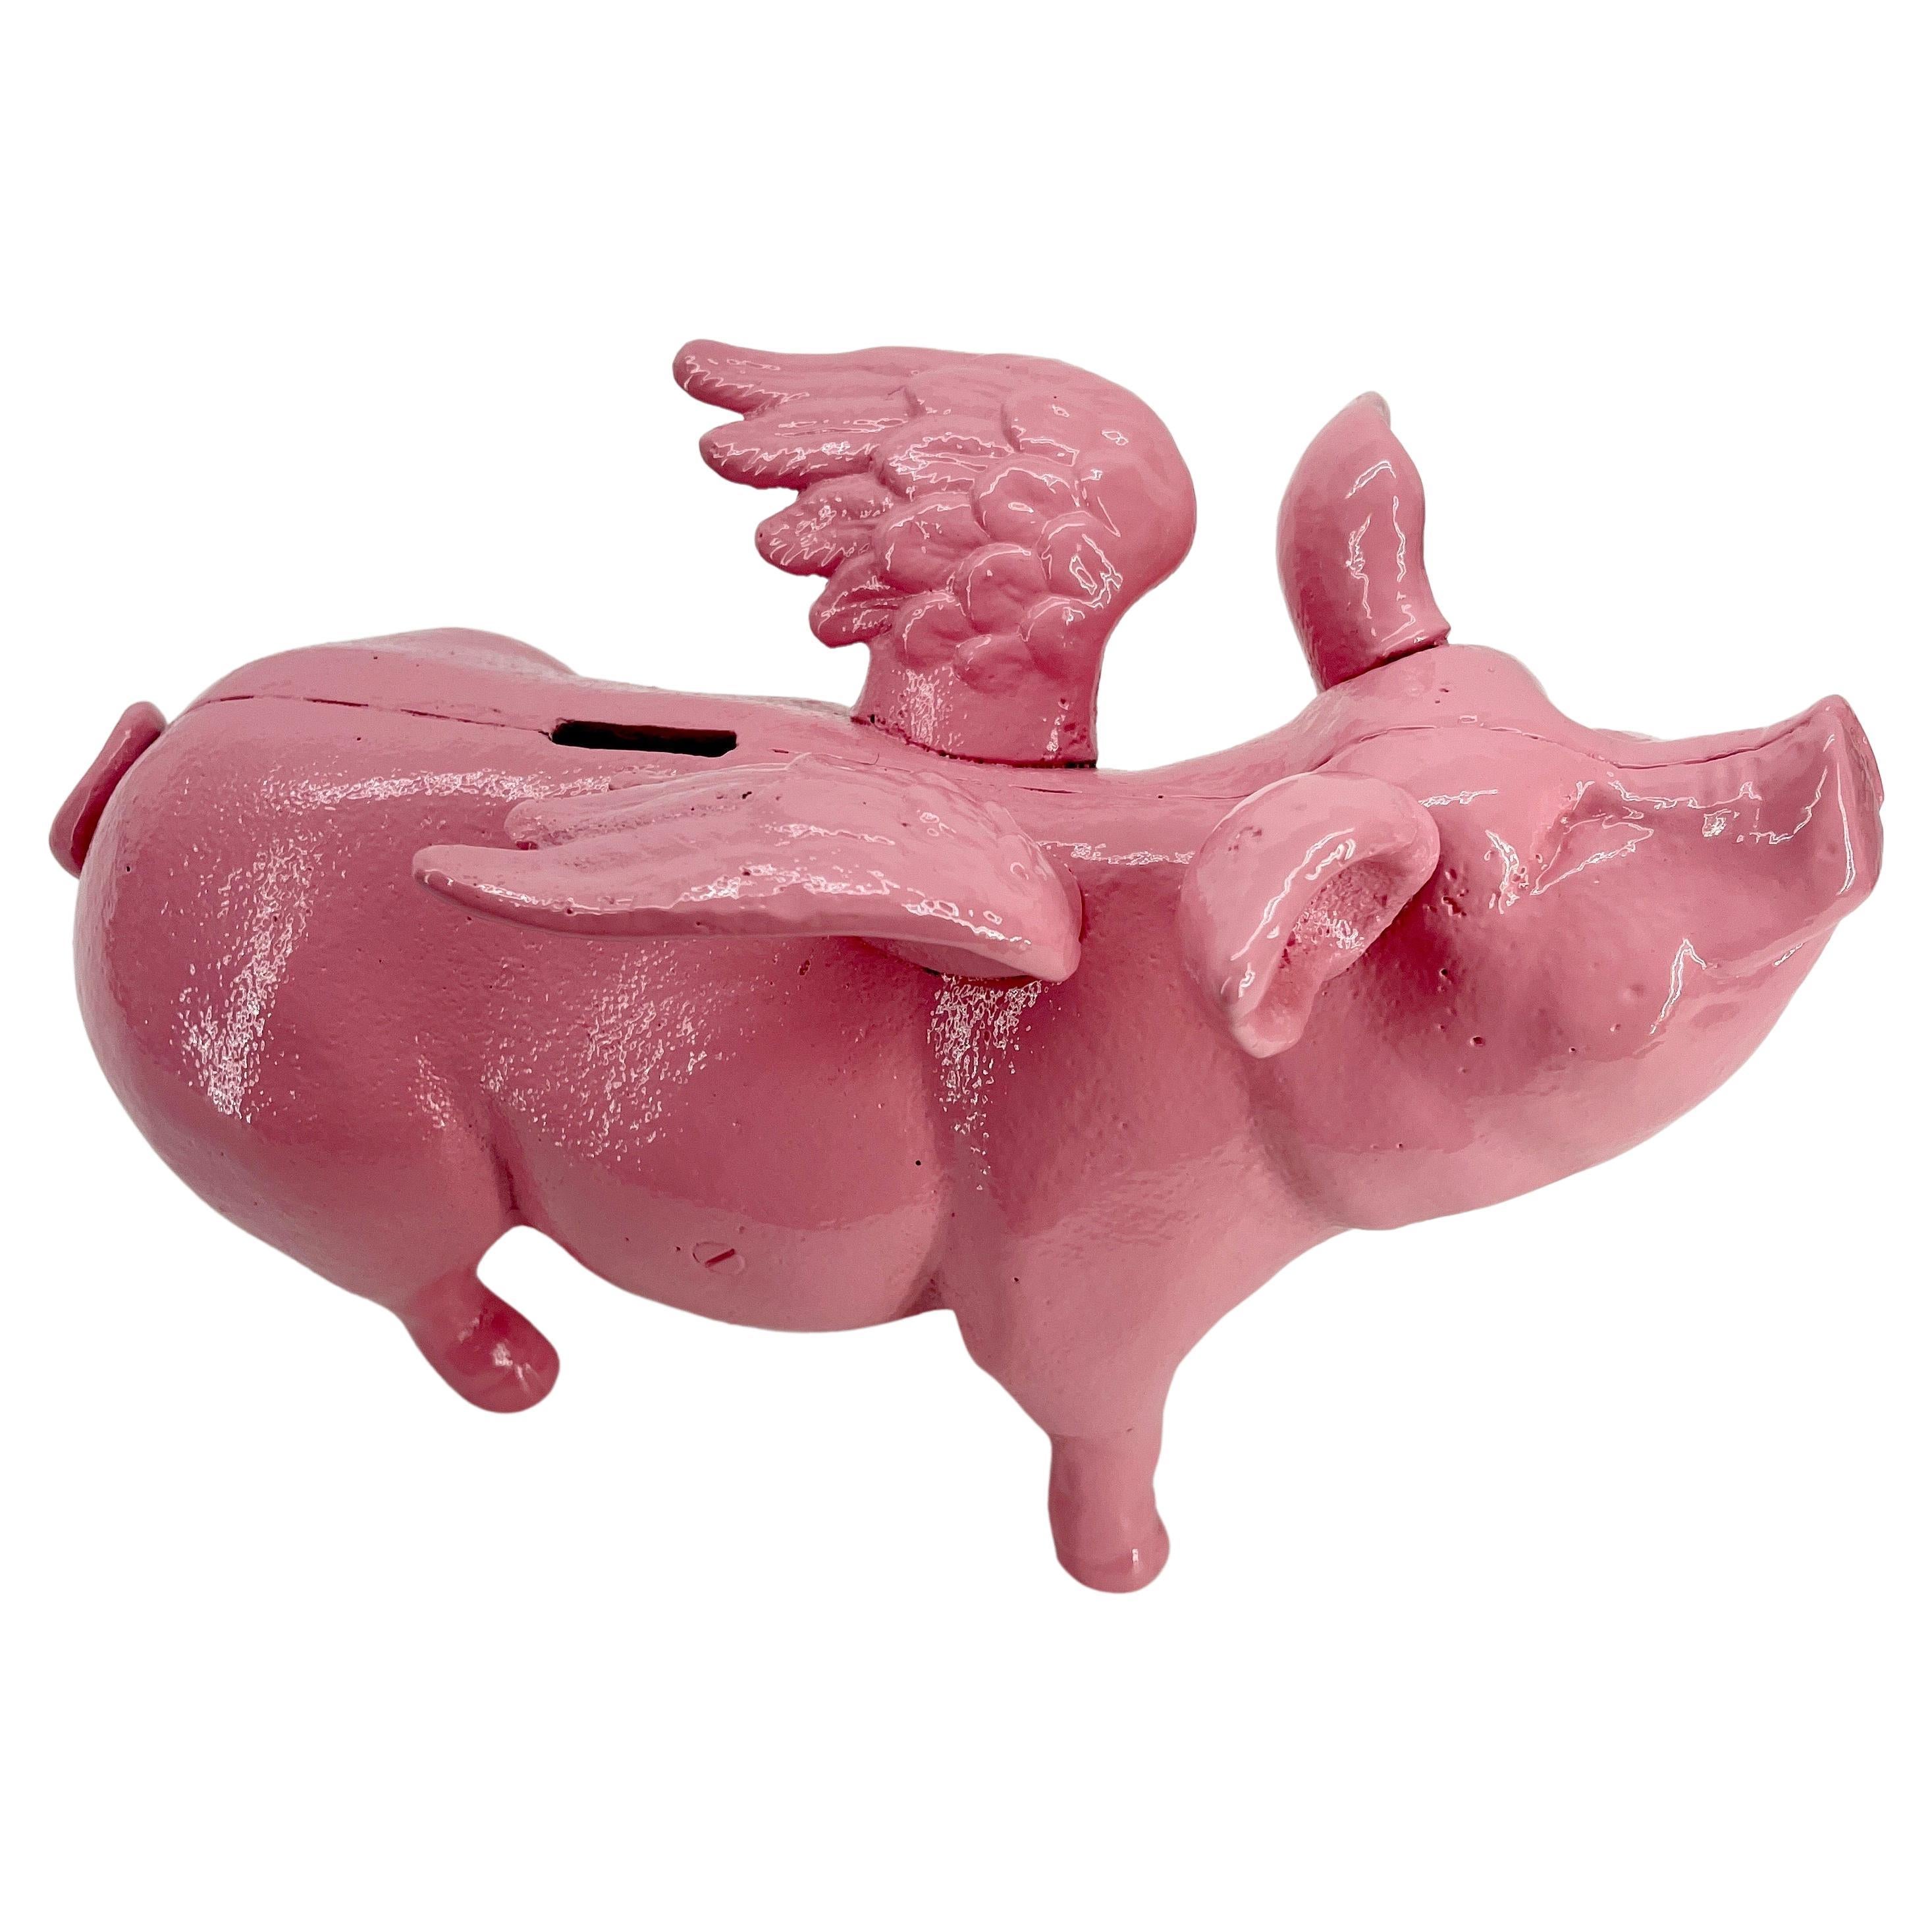 Large Pink Cast Iron Pig Money Bank or Doorstop with Wings, Denmark